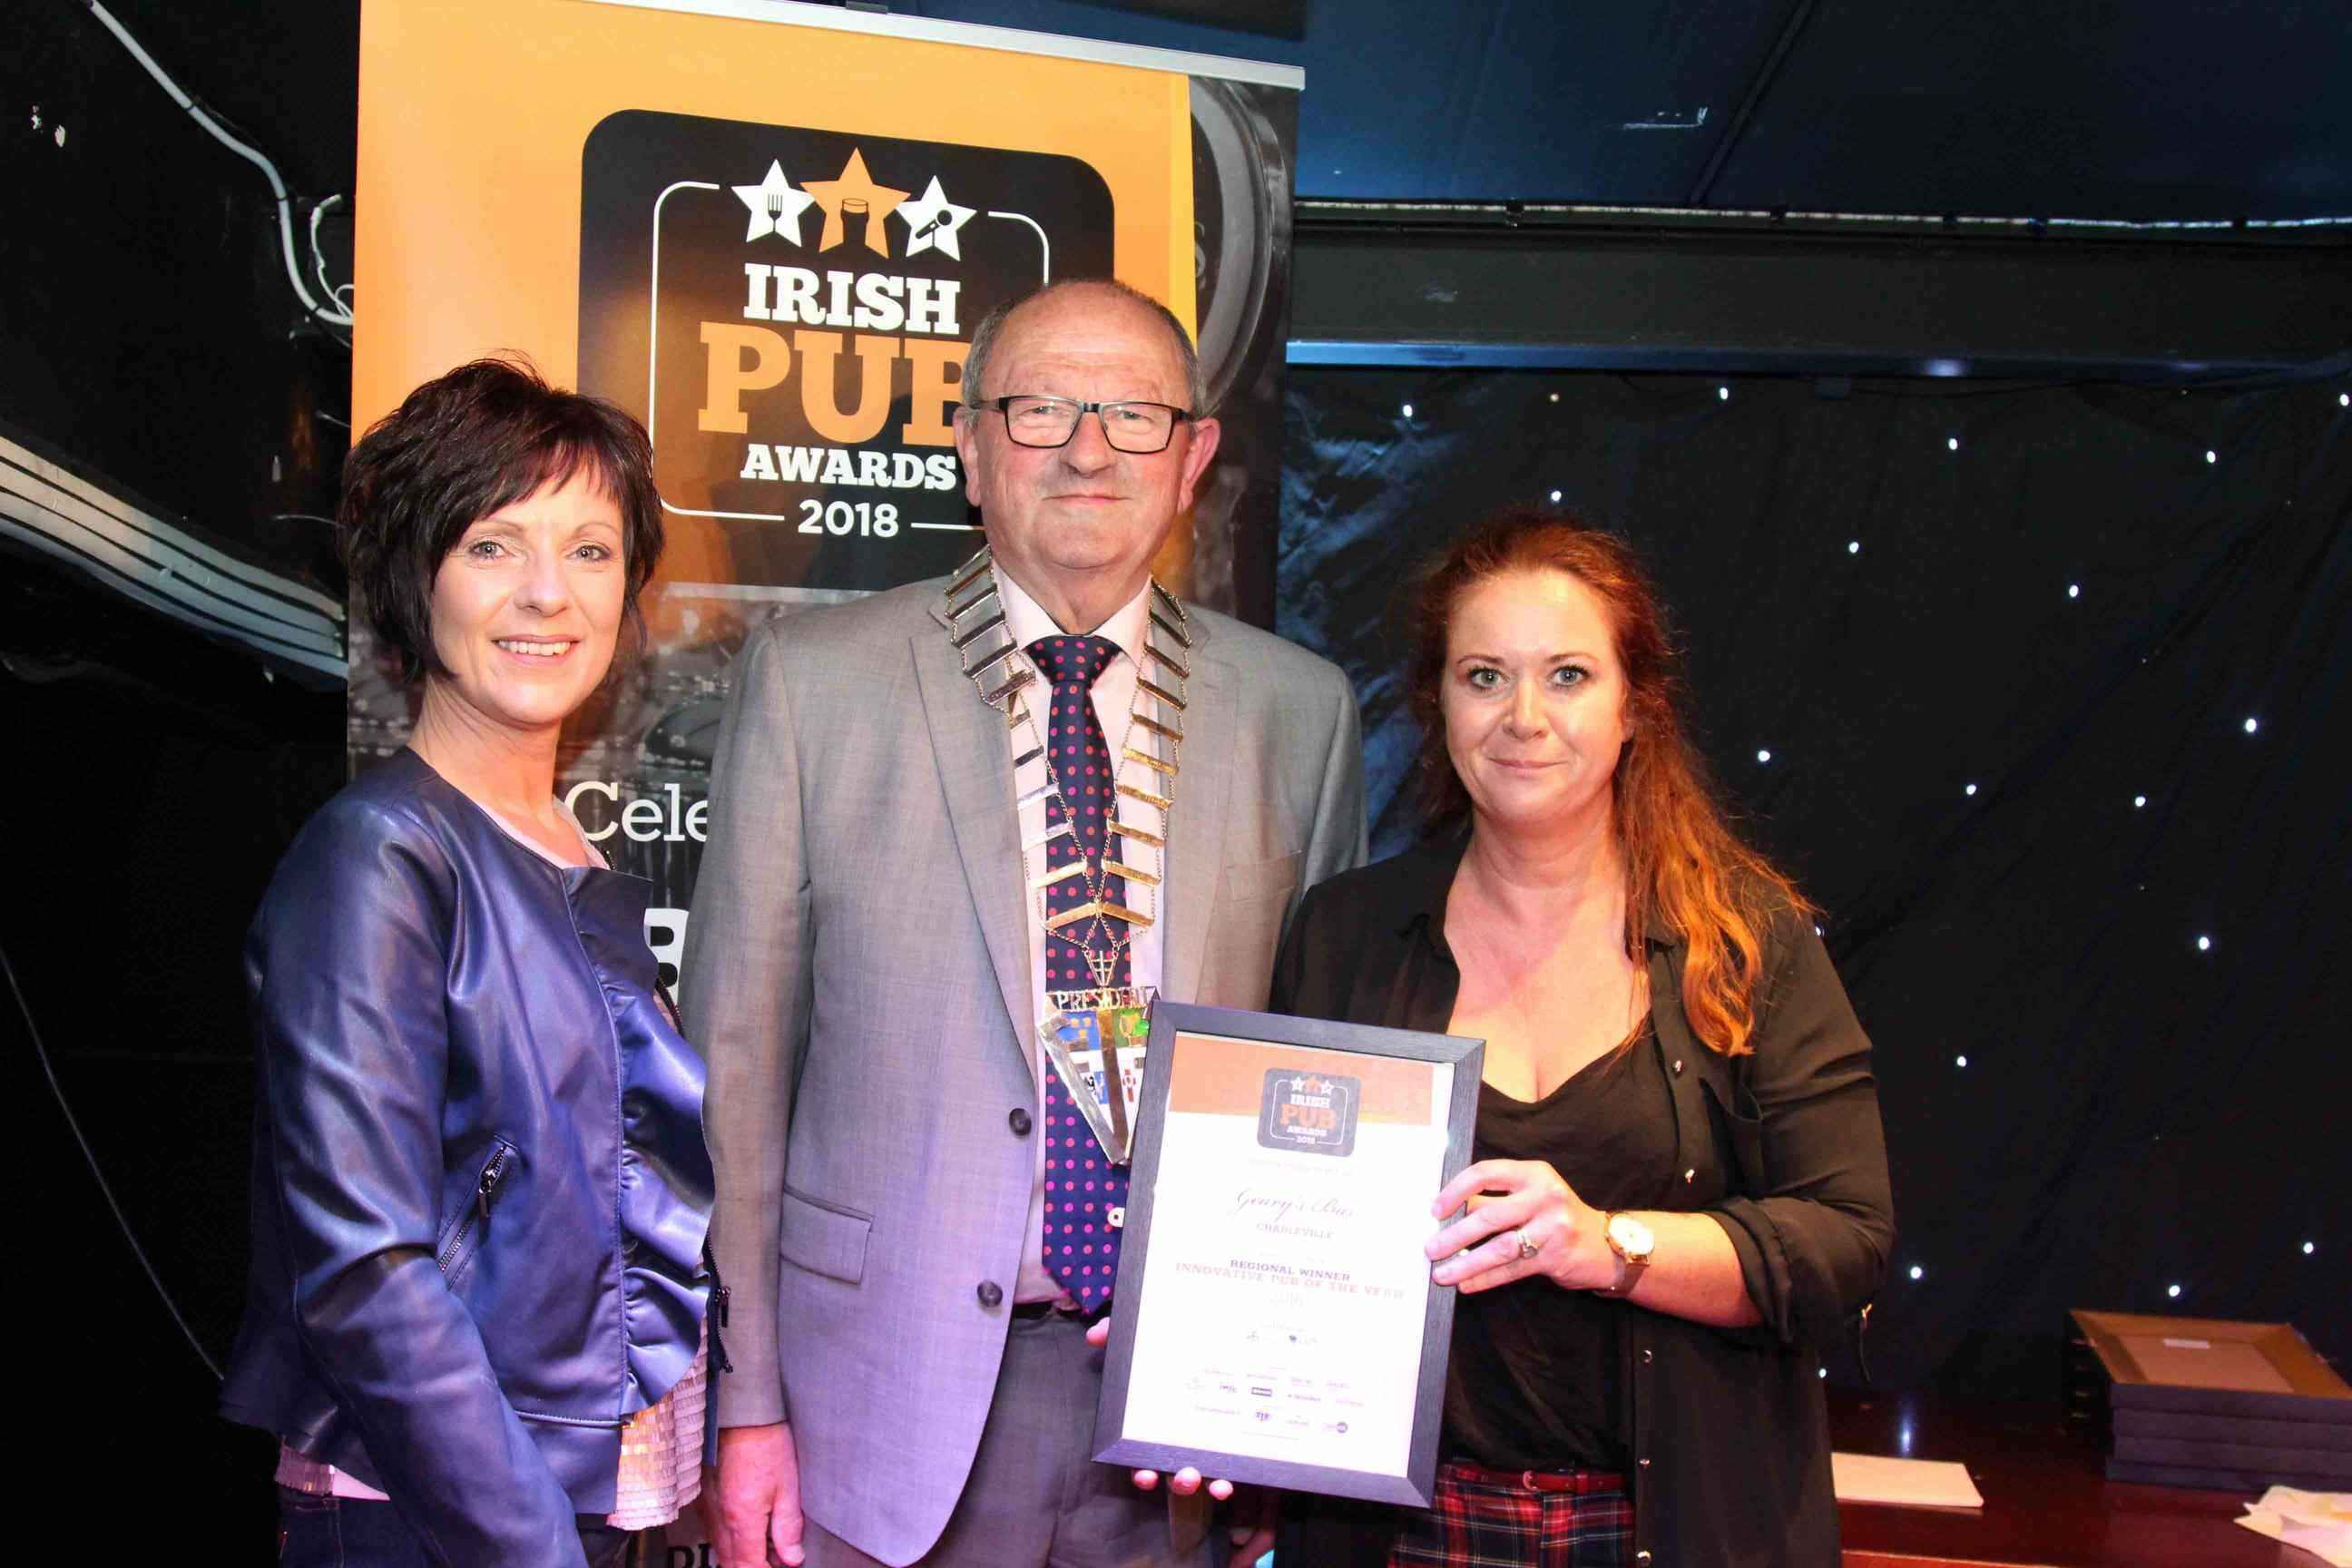 Cork’s Innovative Pub of the Year winners (from left): Elaine Doyle of Geary’s Bar in Charleville County Cork with VFI President Padraic McGann and Geary’s Bar’s Corina Gough.